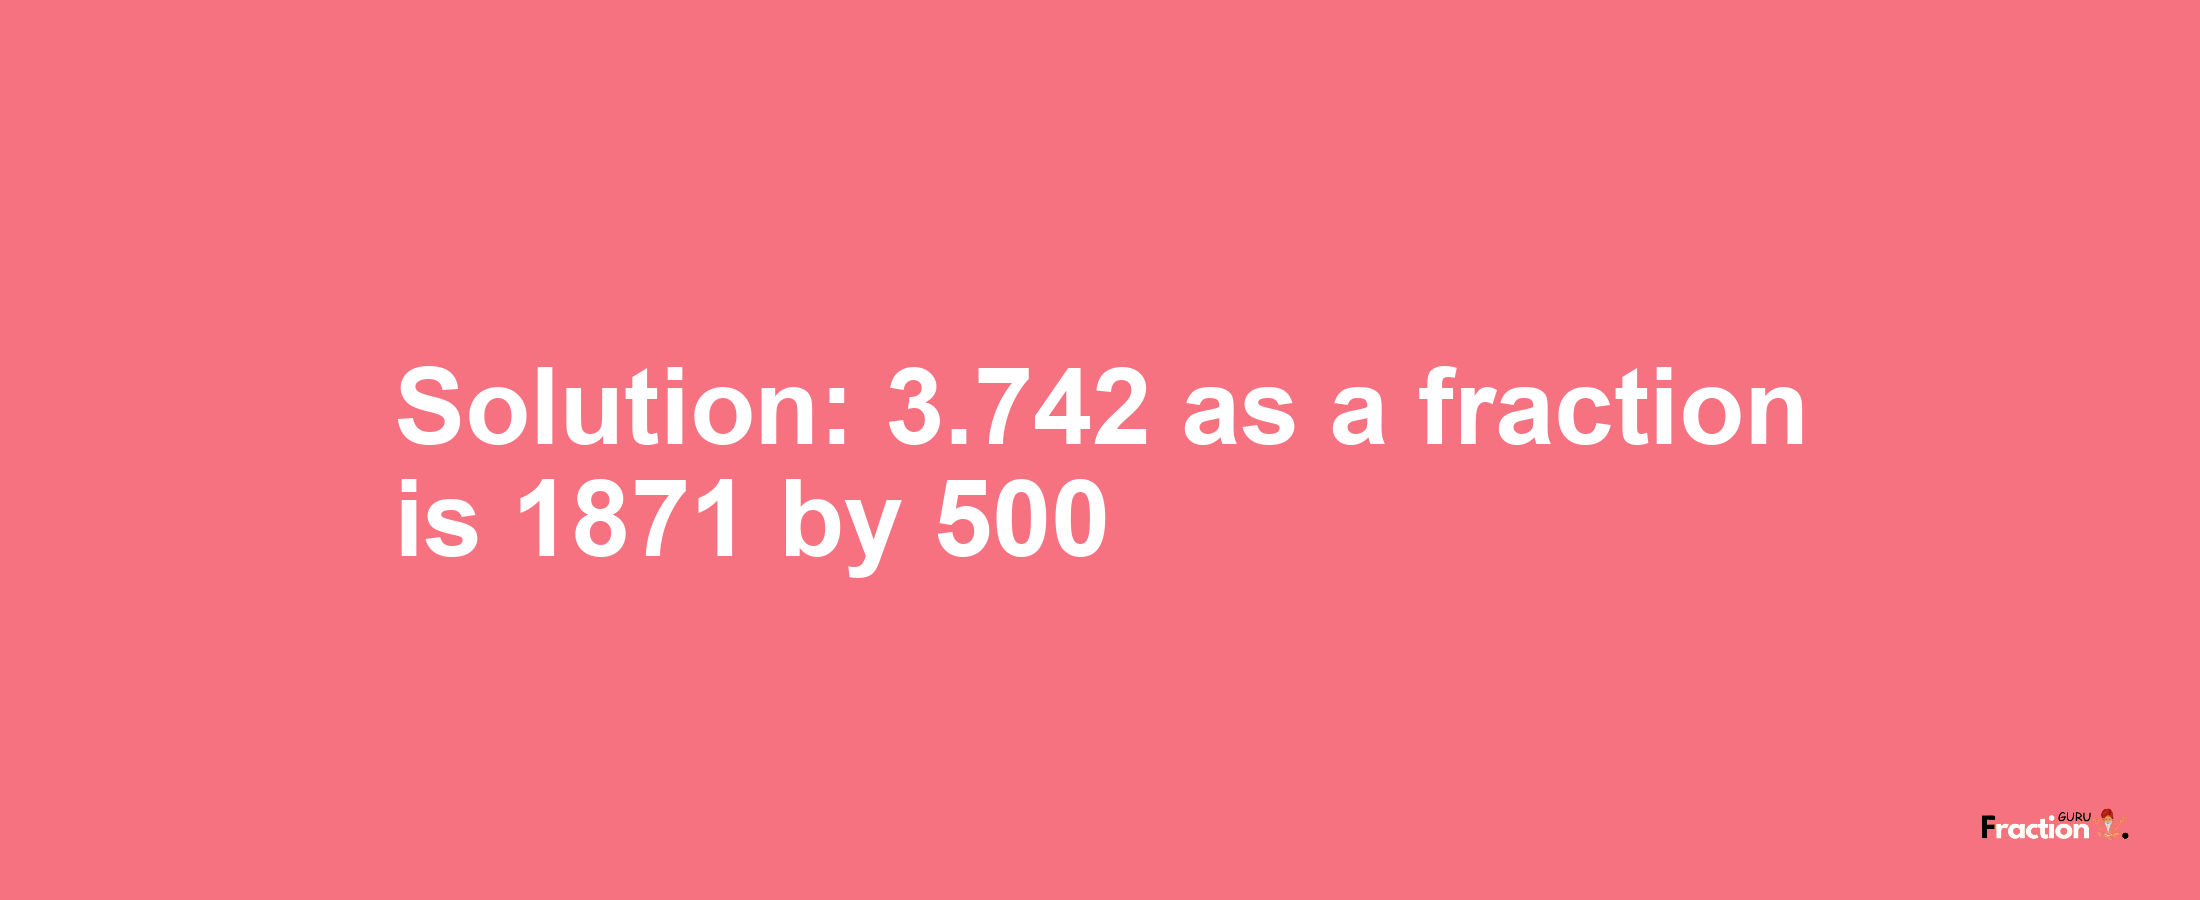 Solution:3.742 as a fraction is 1871/500